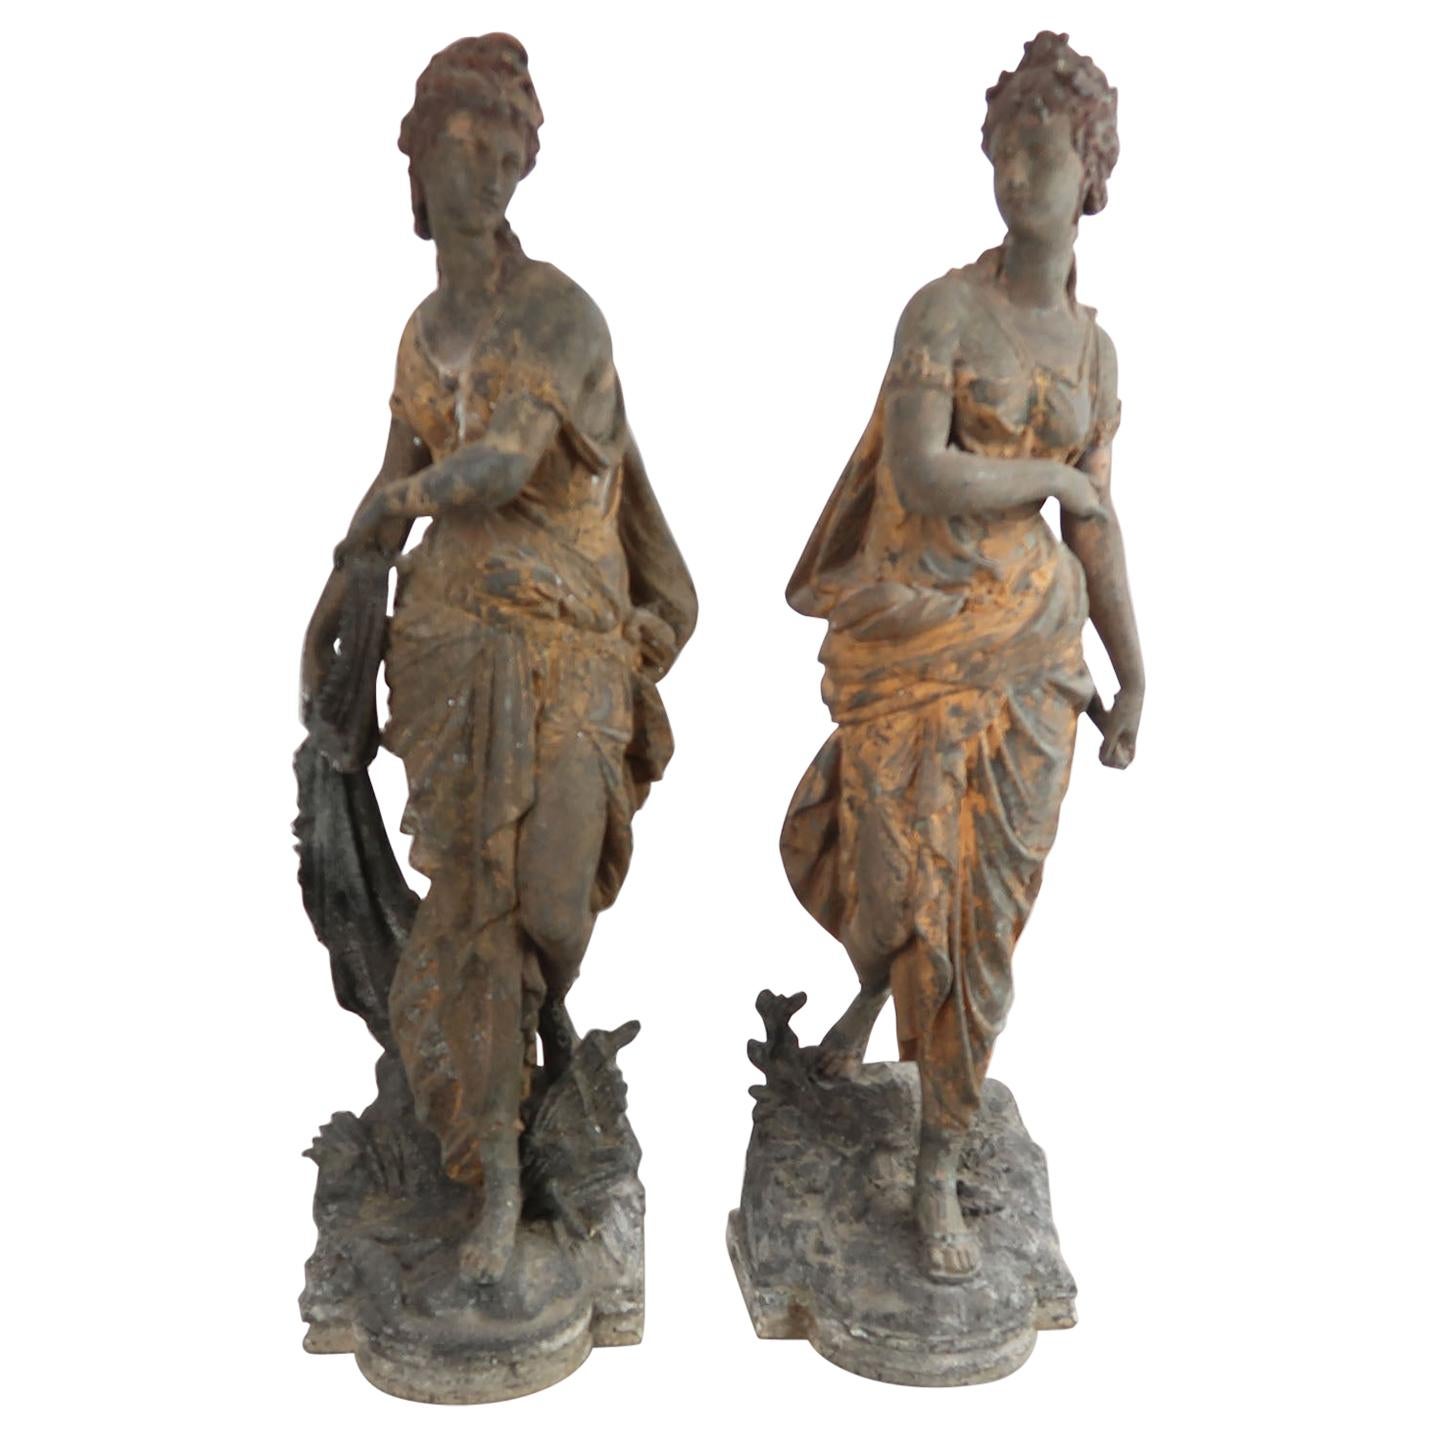 Pair of Antique Cast Metal Neo-Classical Figures, English, Late 19th Century